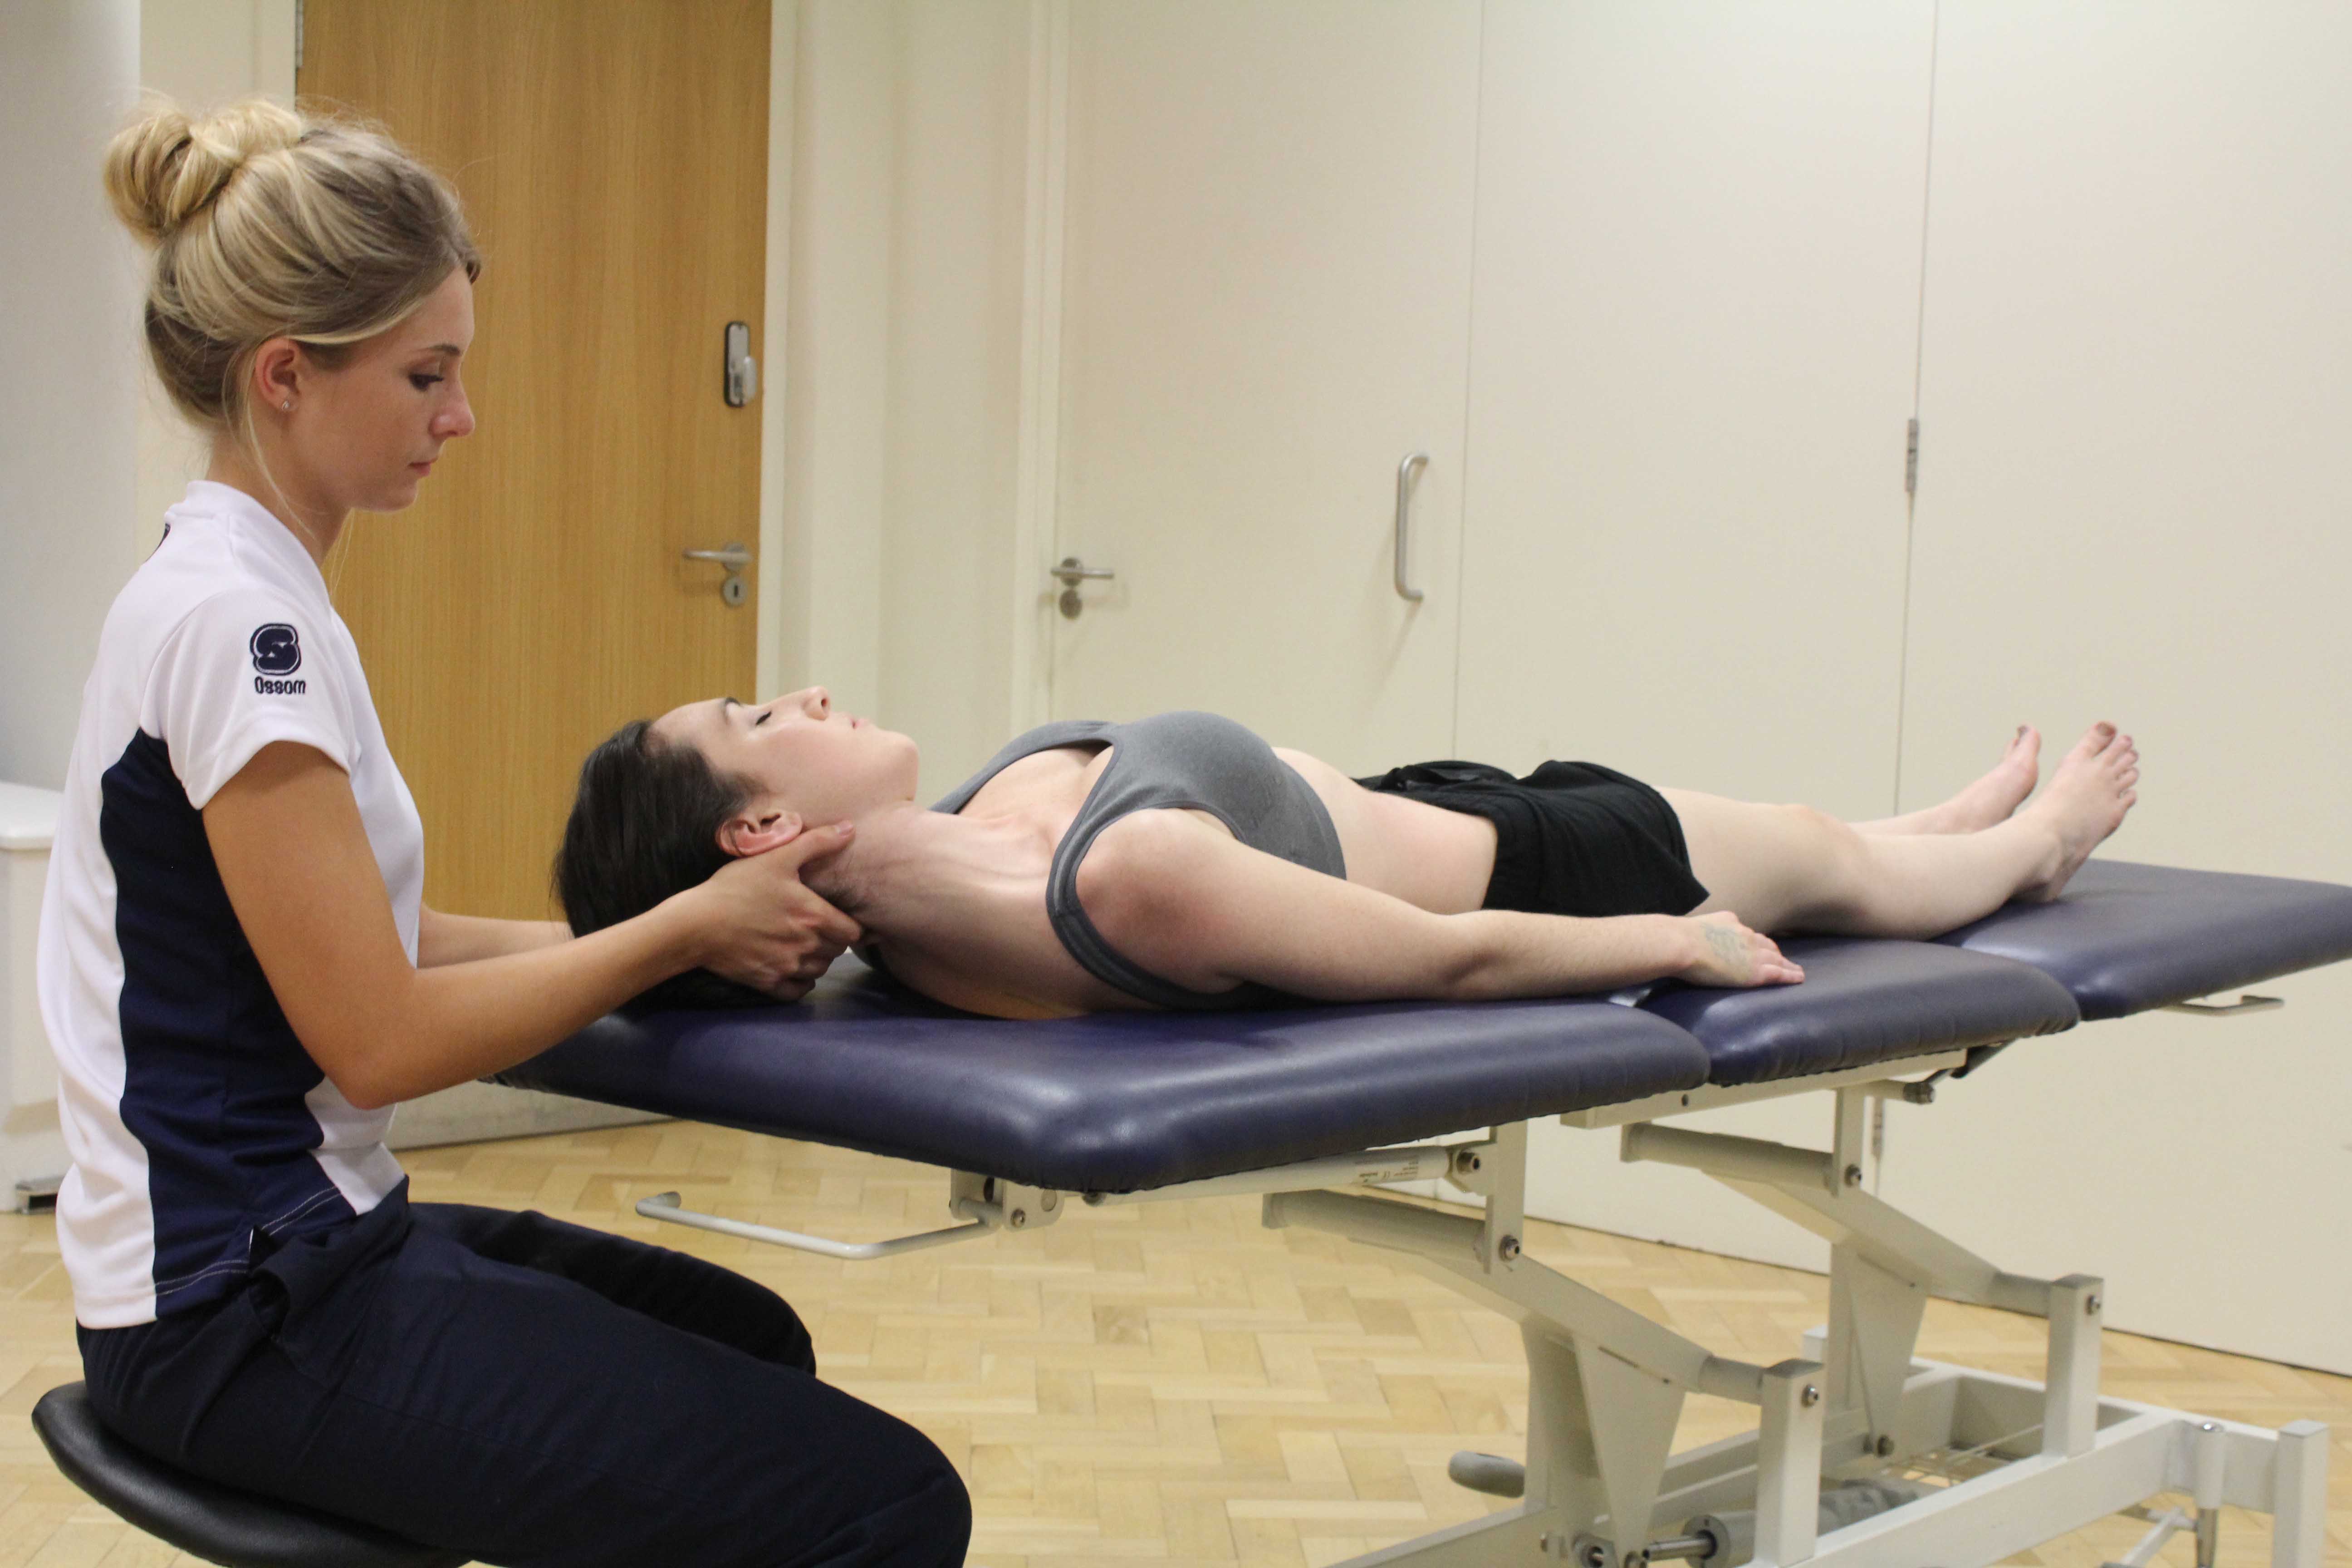 Neck realignment through gentle mobilisations and stretches performed by a paediatric physiotherapist